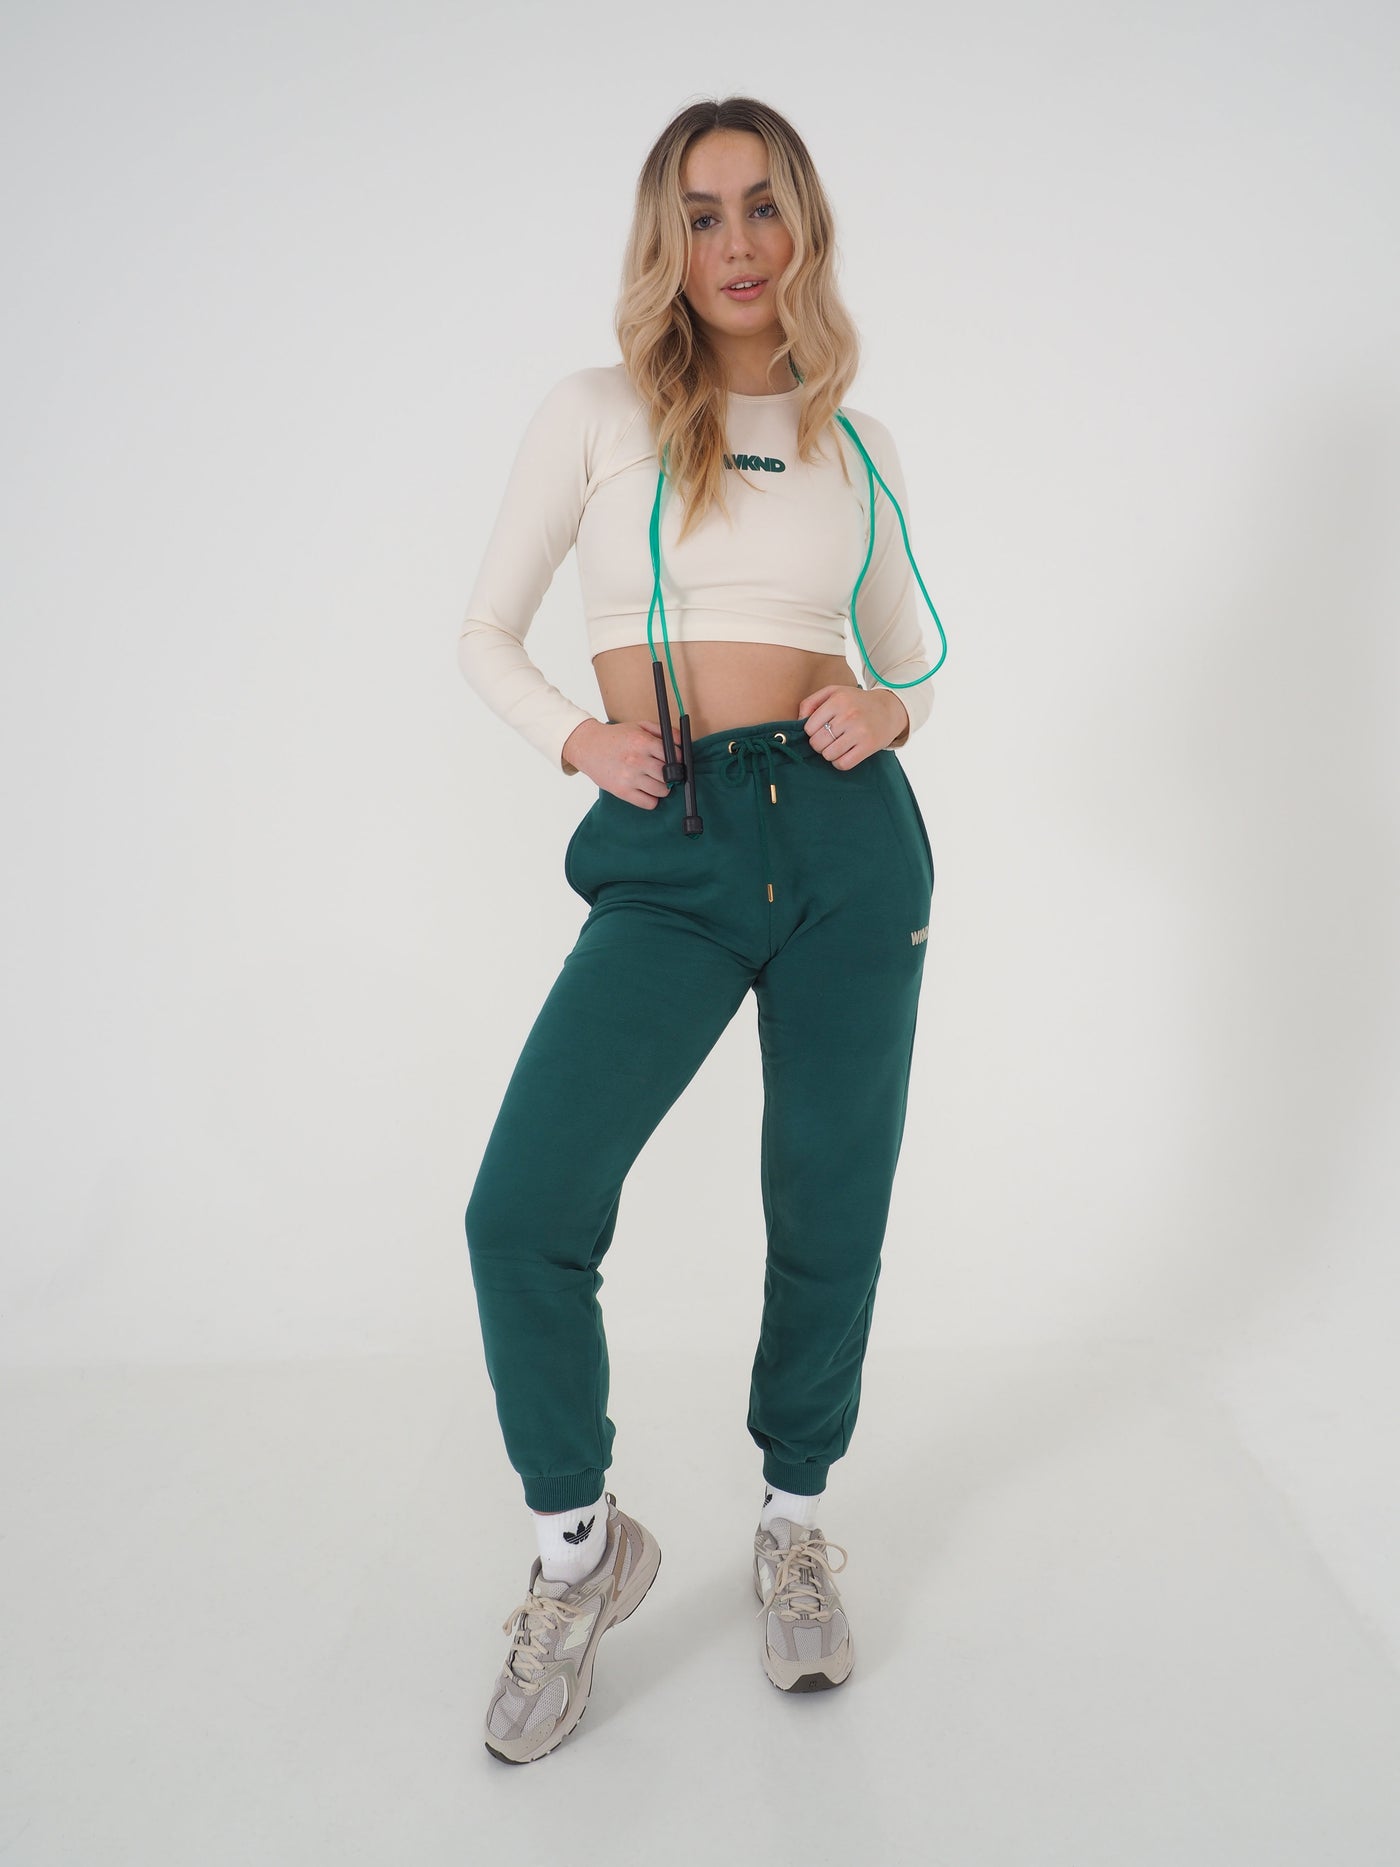 Blonde model is wearing a long sleeve crop top in eggnog cream and matching green joggers.  The WKND logo is green and printed centrally to the chest. Model is also posing with a skipping rope.